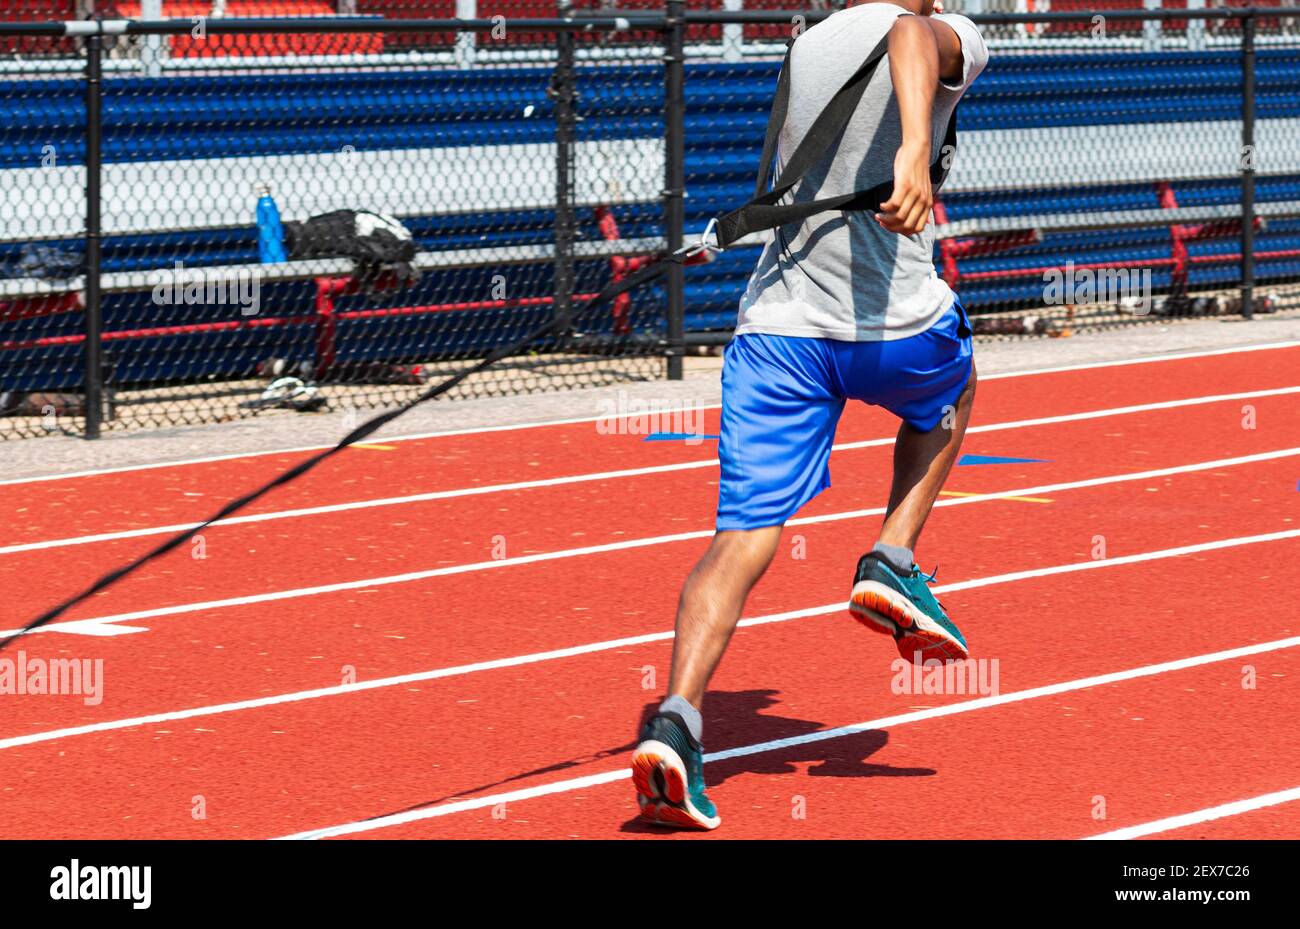 A high school male track and field runner is pulling a weighted sled on a red track for strength and resistance at practice on a sunny day. Stock Photo